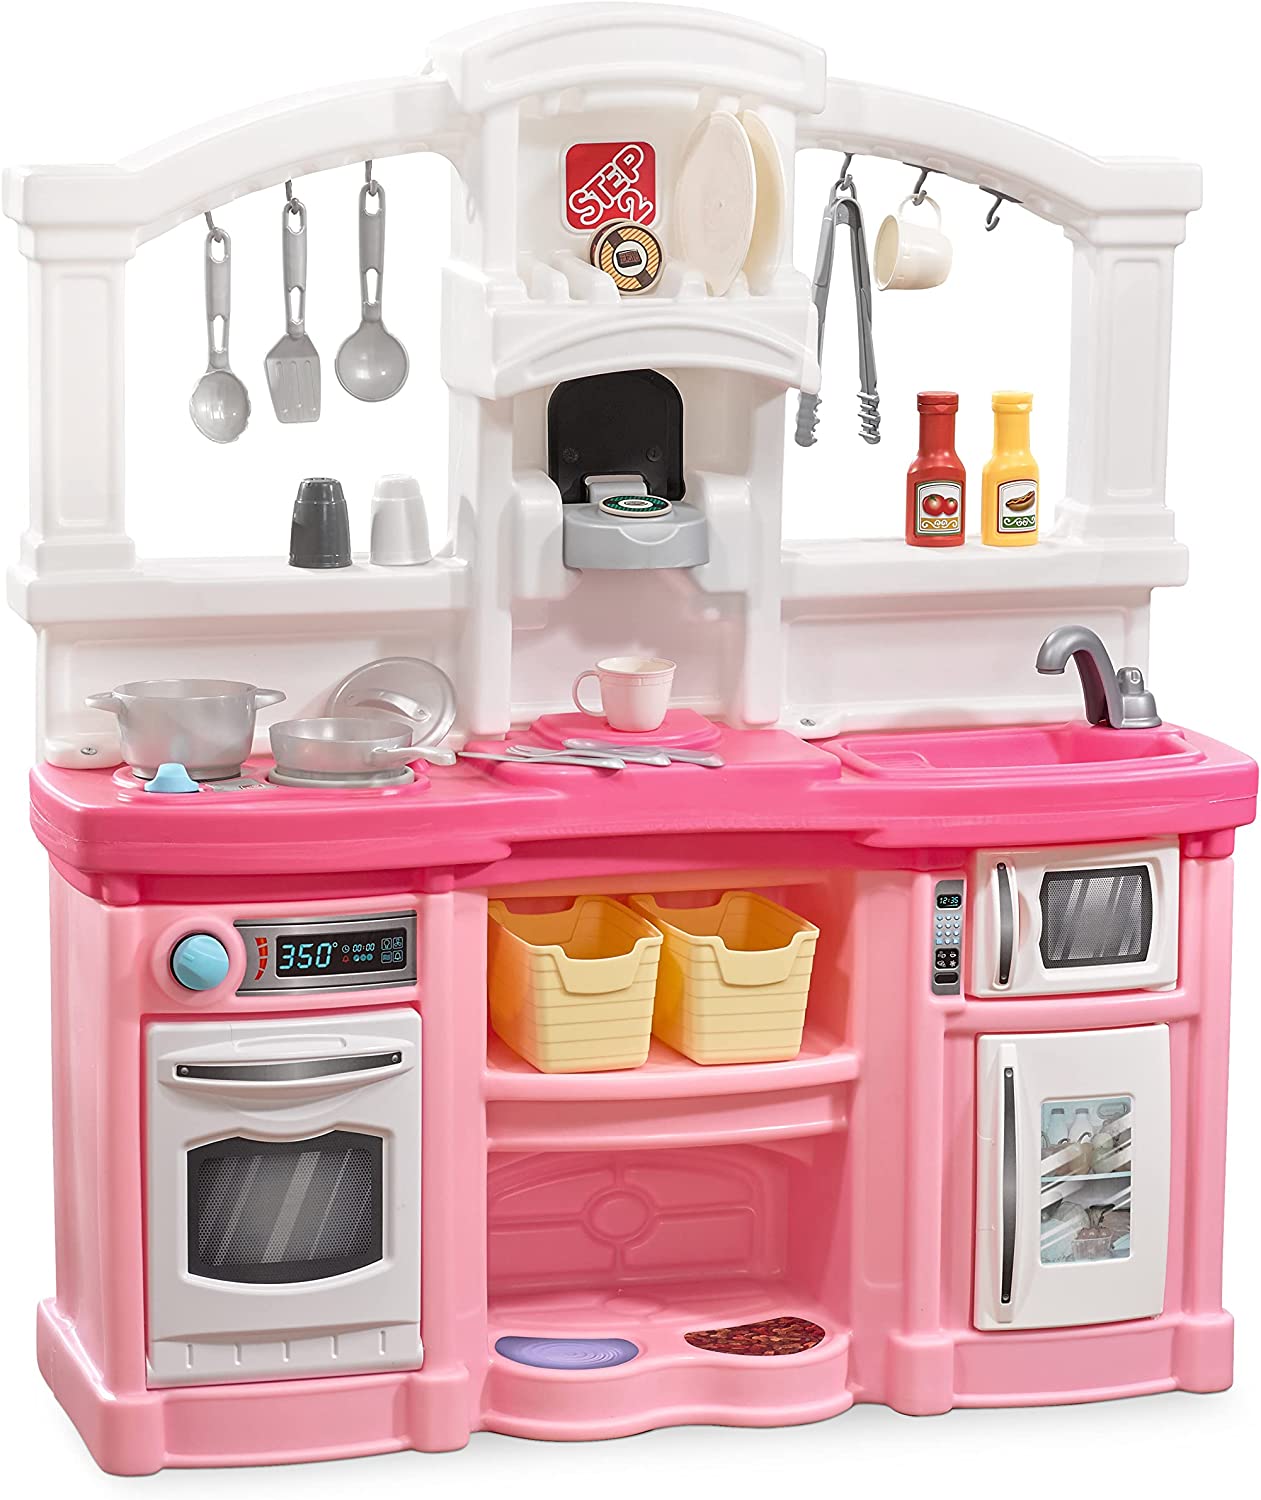 https://bigbigmart.com/wp-content/uploads/2023/05/Step2-Fun-with-Friends-Kitchen-Set-for-Kids-%E2%80%93-Pink-%E2%80%93-Includes-Toy-Kitchen-Accessories-Interactive-Features-for-Pretend-Play-%E2%80%93-Indoor-Outdoor-Toddler-Playset.jpg